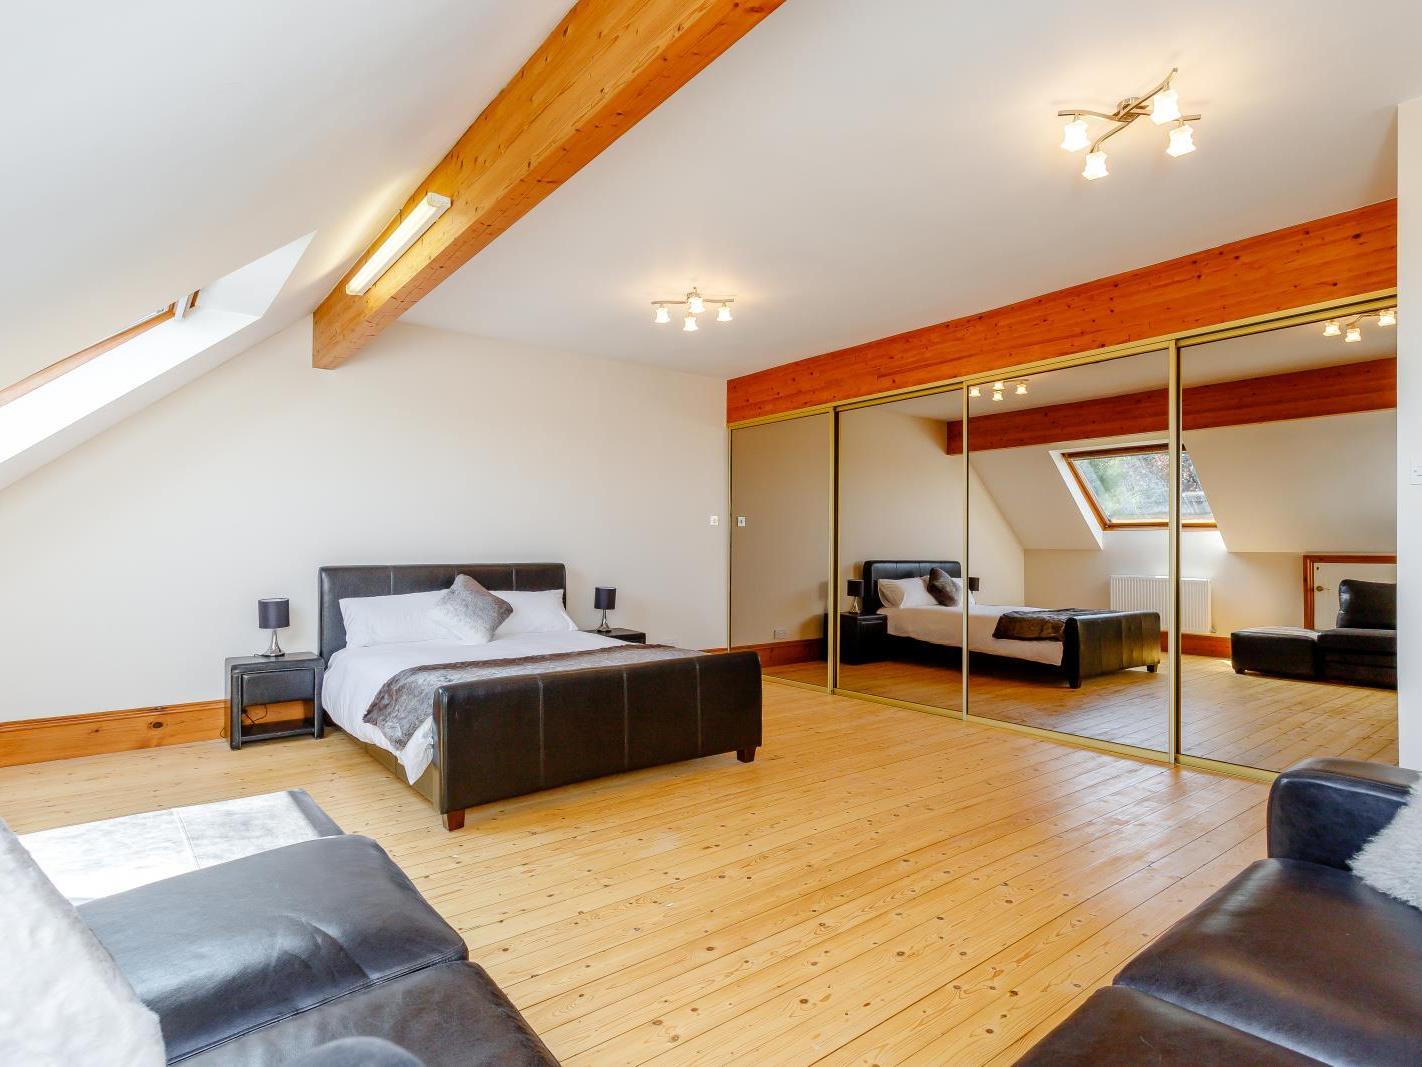 The property has a total of five bedrooms. Photo: Fine and Country.